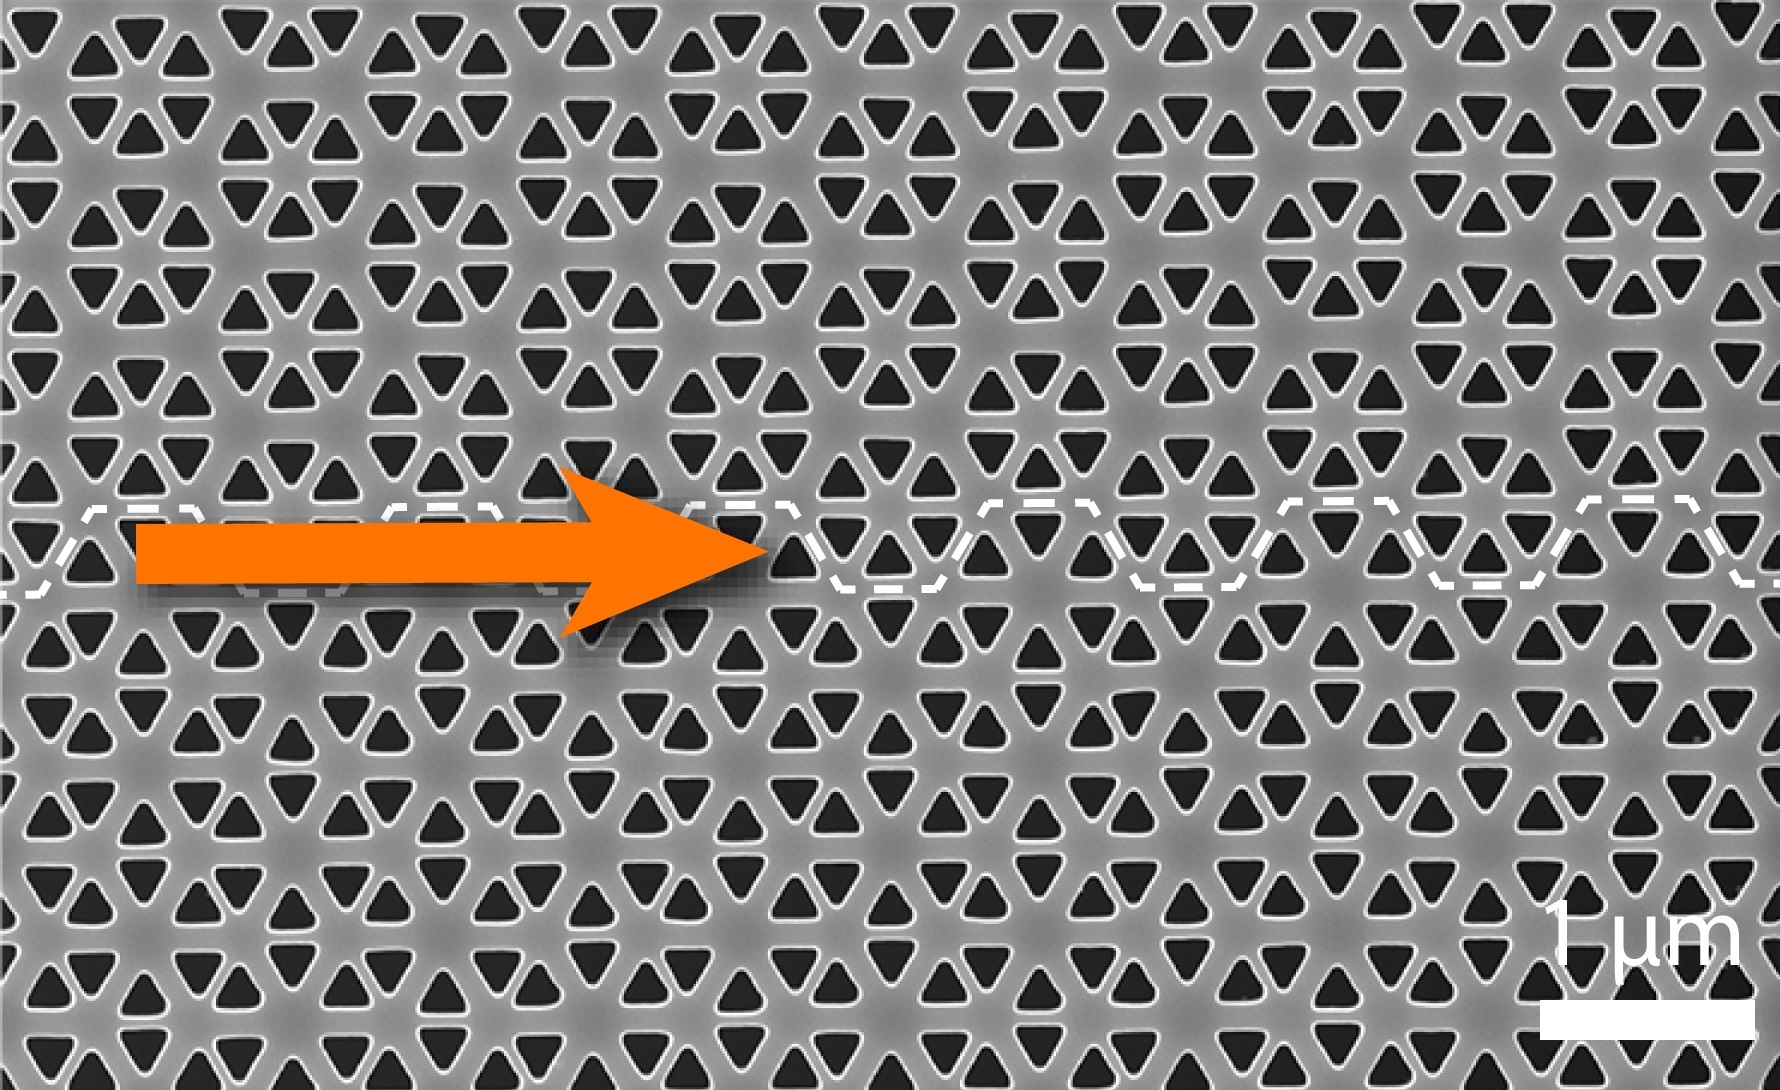 Electron microscopy image of topological photonic crystals in a perforated slab of silicon